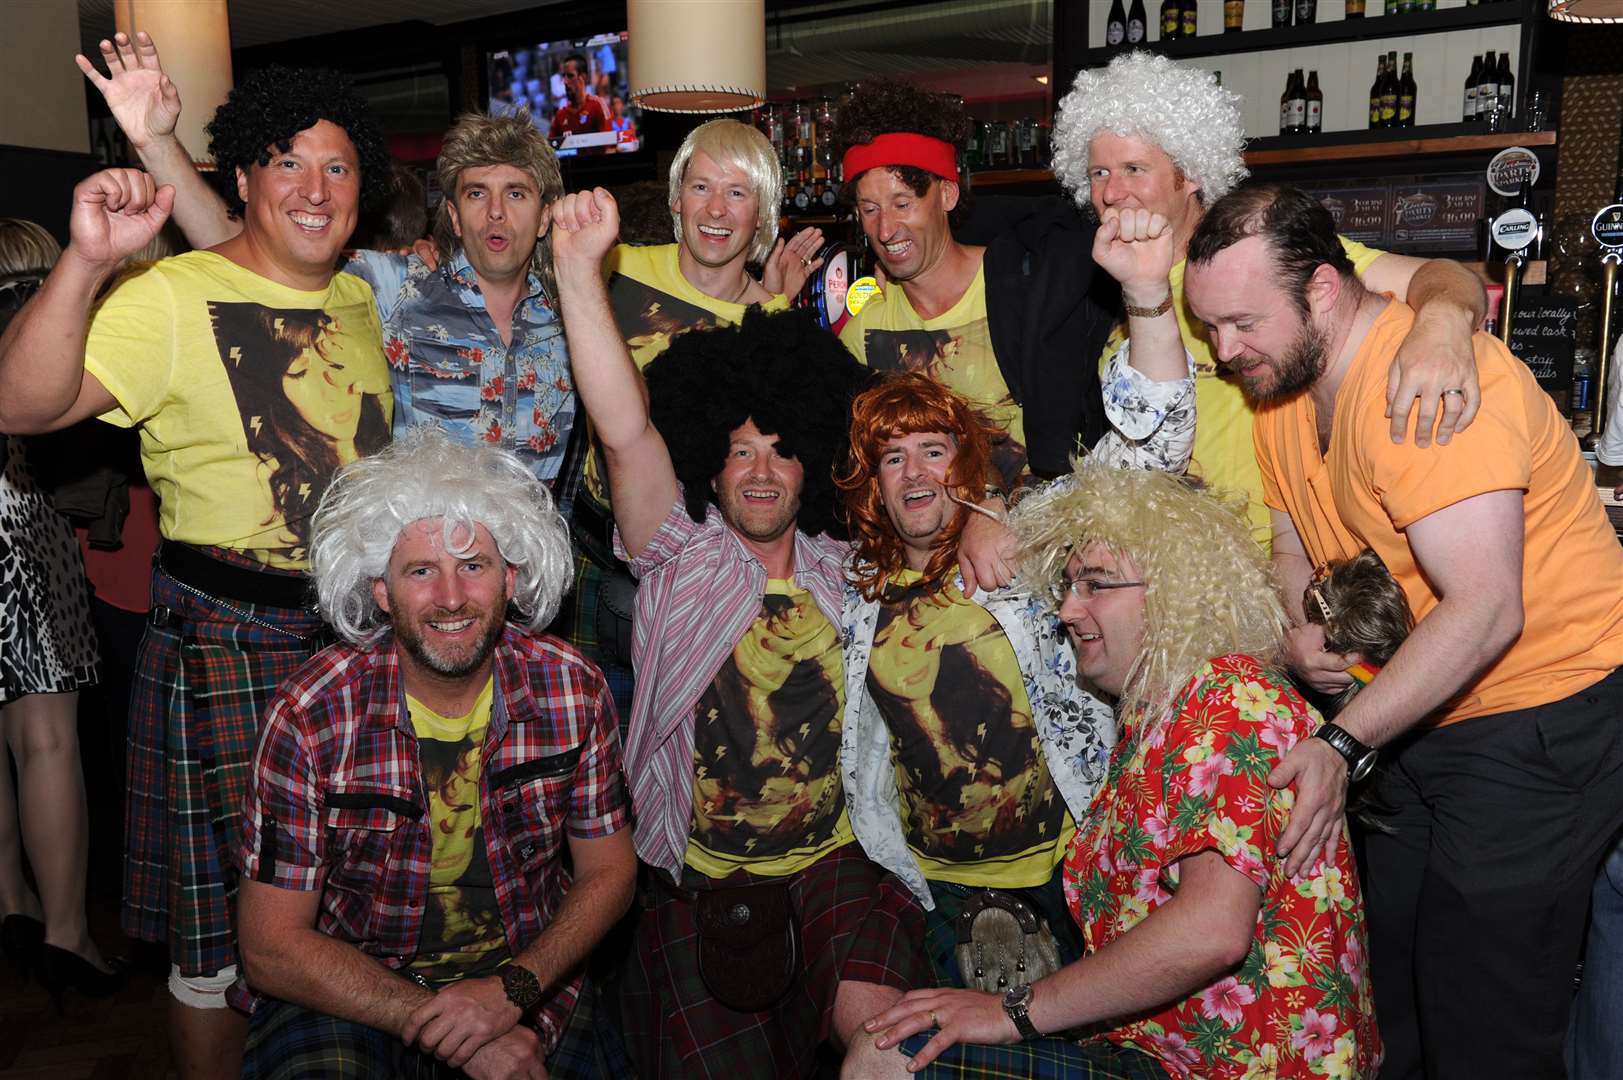 See Copy by: .Cityseen..20th August 2011. Hairy highlanders stag night for Mark Grant (centre,big hair).....Pic by: Gary Anthony.SPP Staff Photographer.New Century House.Longman Road.Inverness.Tel: 01463 233059.